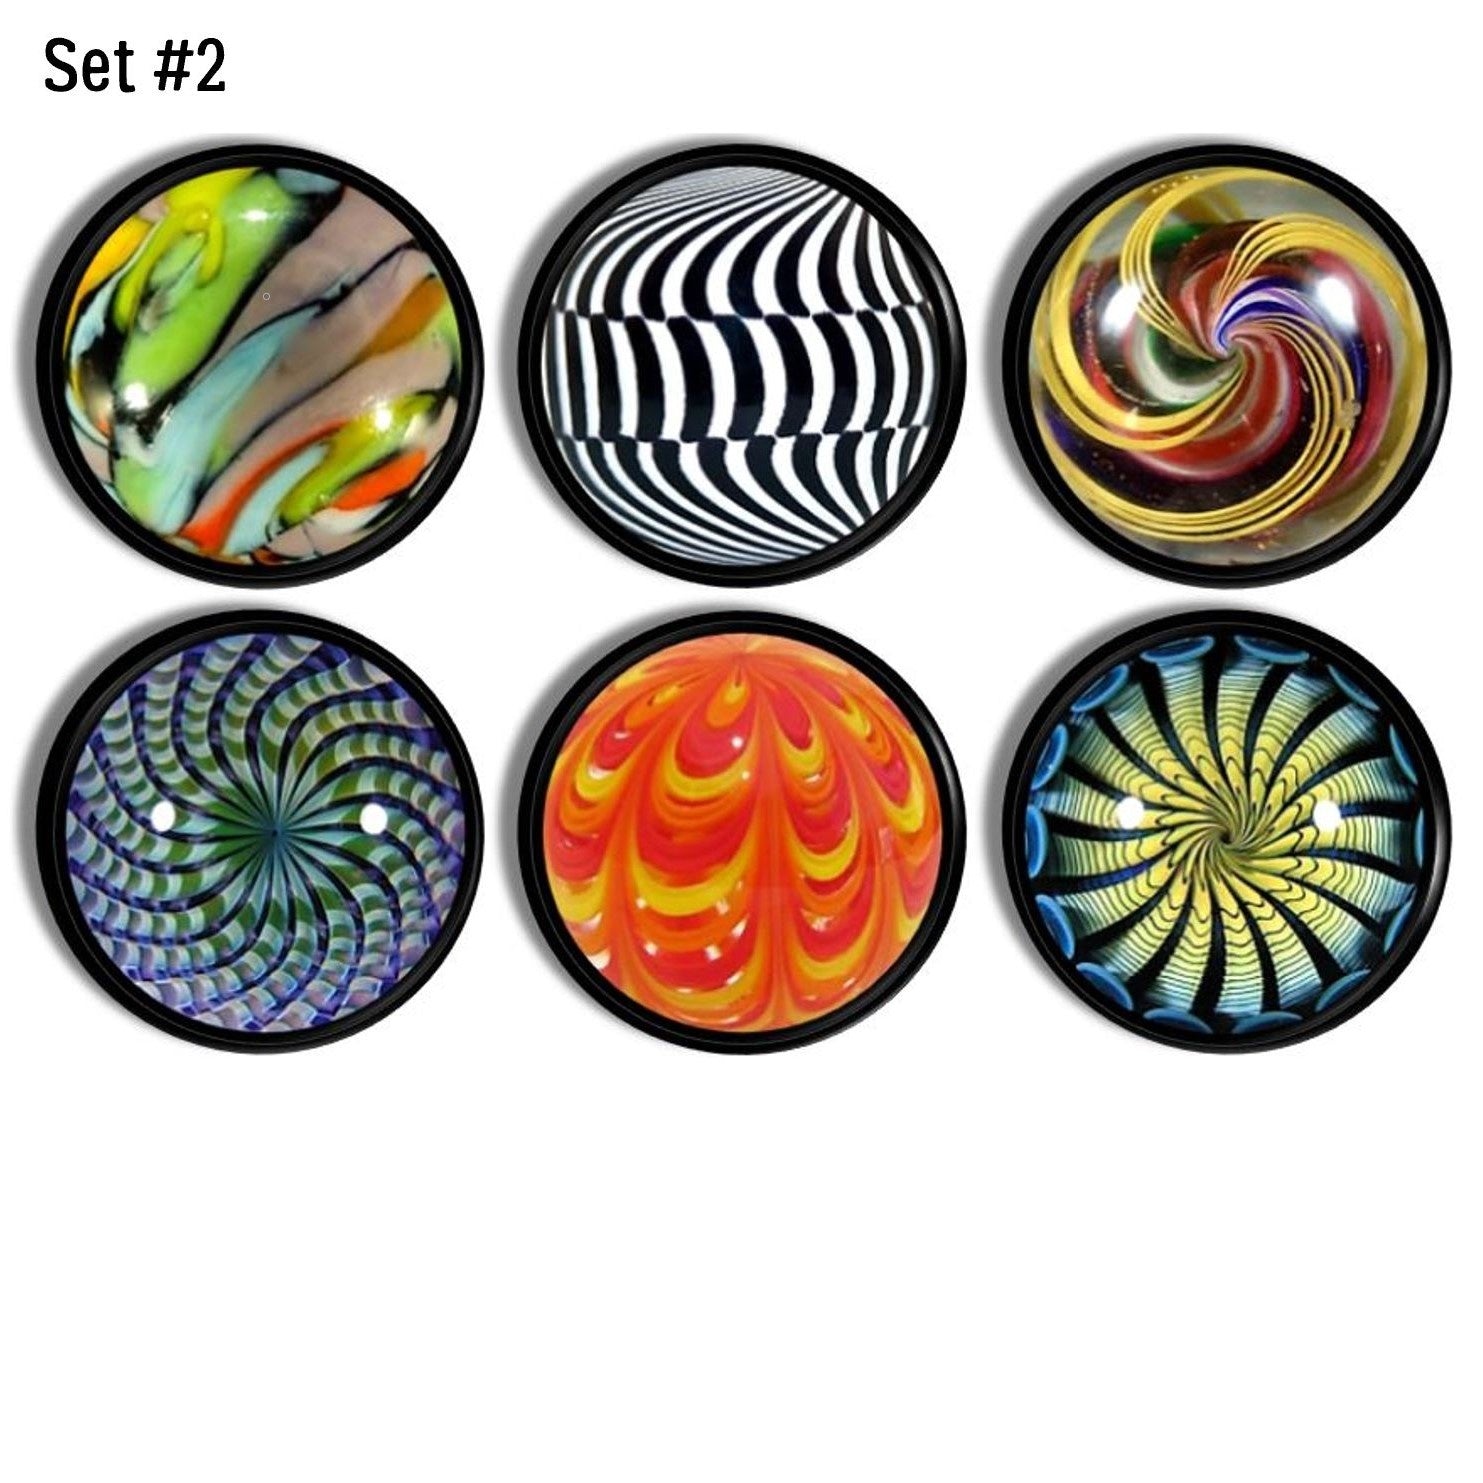 6 Handmade furniture drawer pulls. Vintage glass marble theme cabinet door handle knobs. Blue, orange, green and red graphics on black hardware.